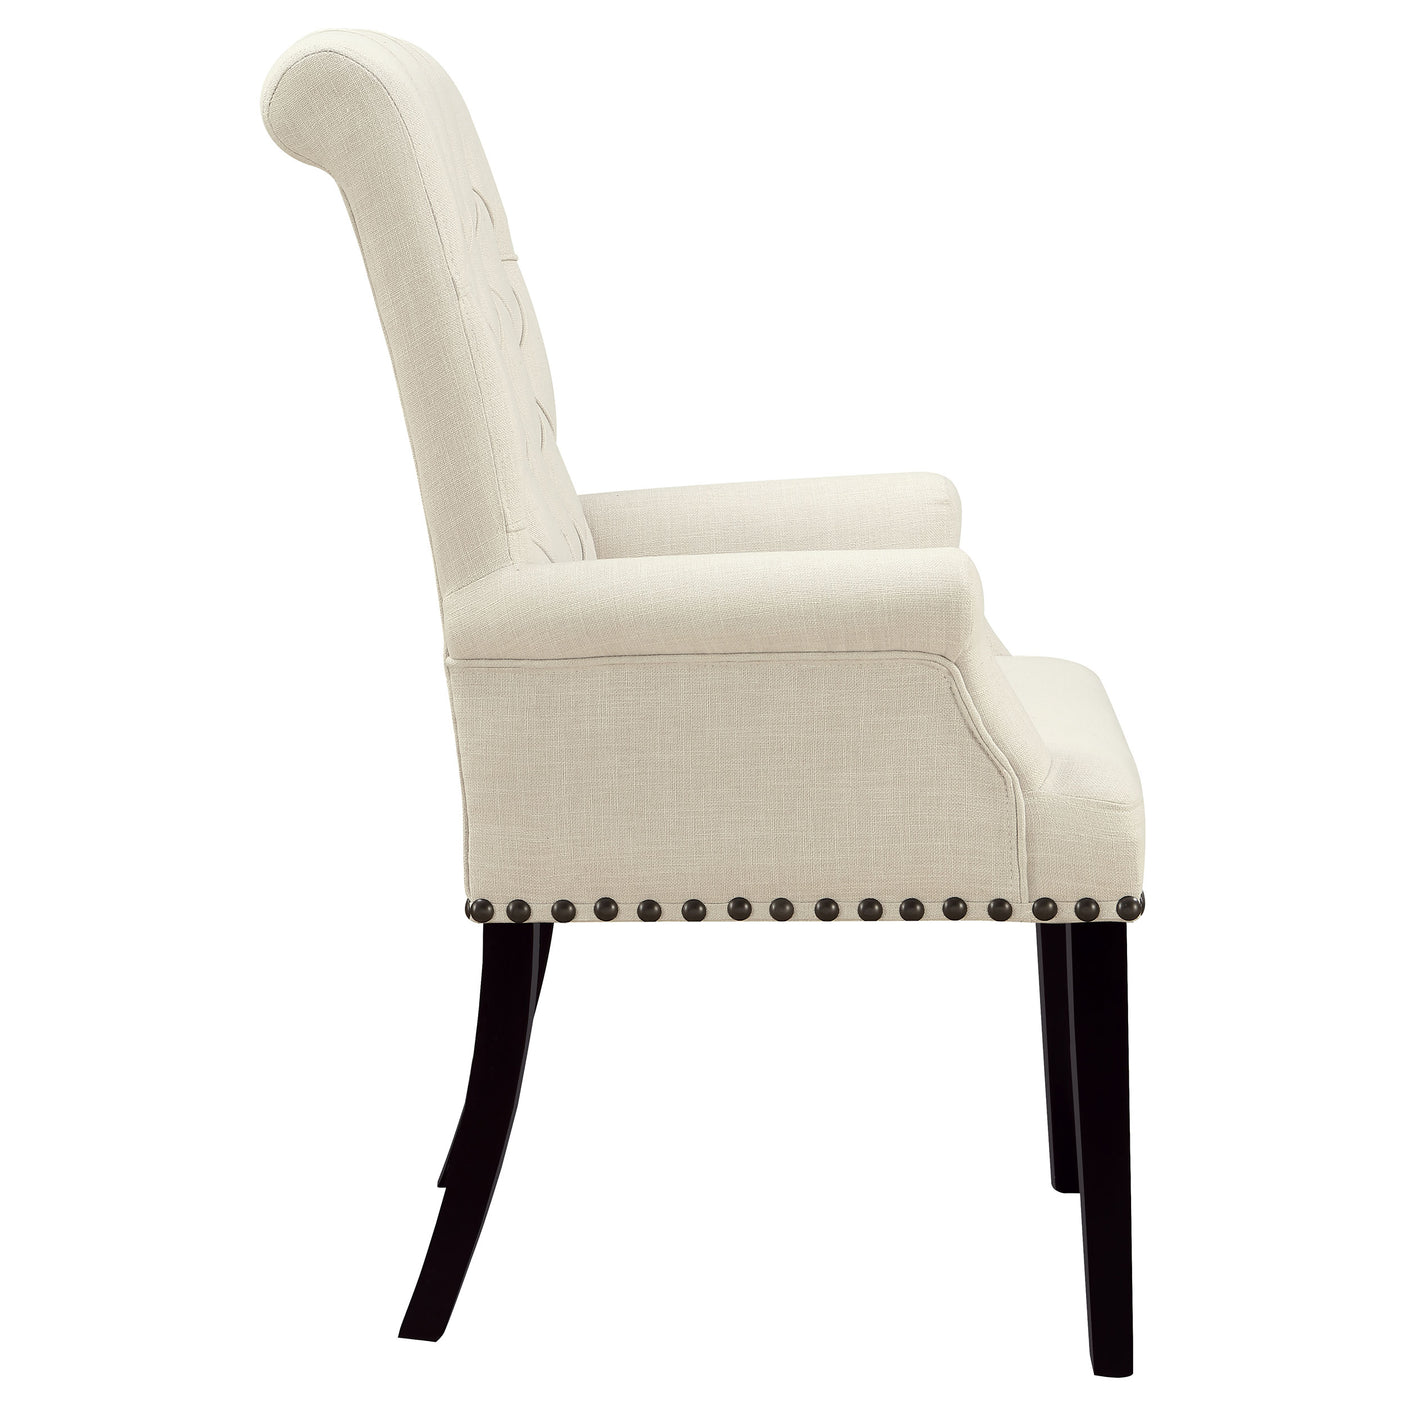 Arm Chair - Alana Tufted Back Upholstered Arm Chair Beige